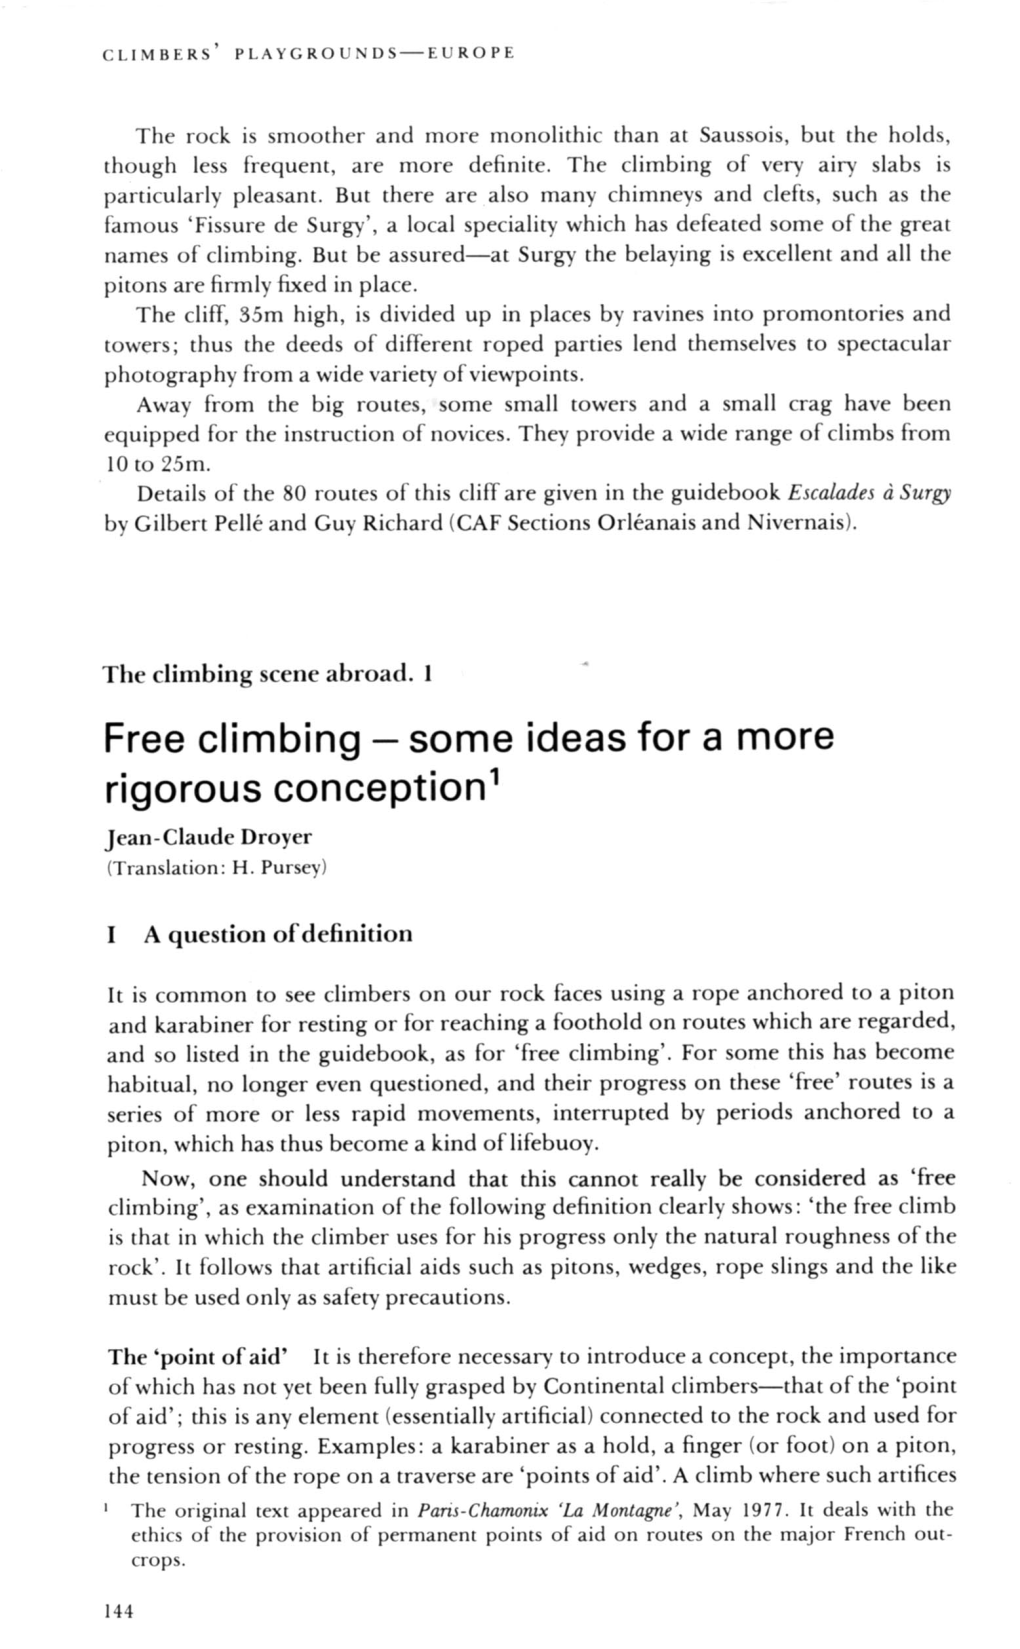 Free Climbing - Some Ideas for a More Rigorous Conception 1 Jean-Claude Droyer (Tran Lation: H